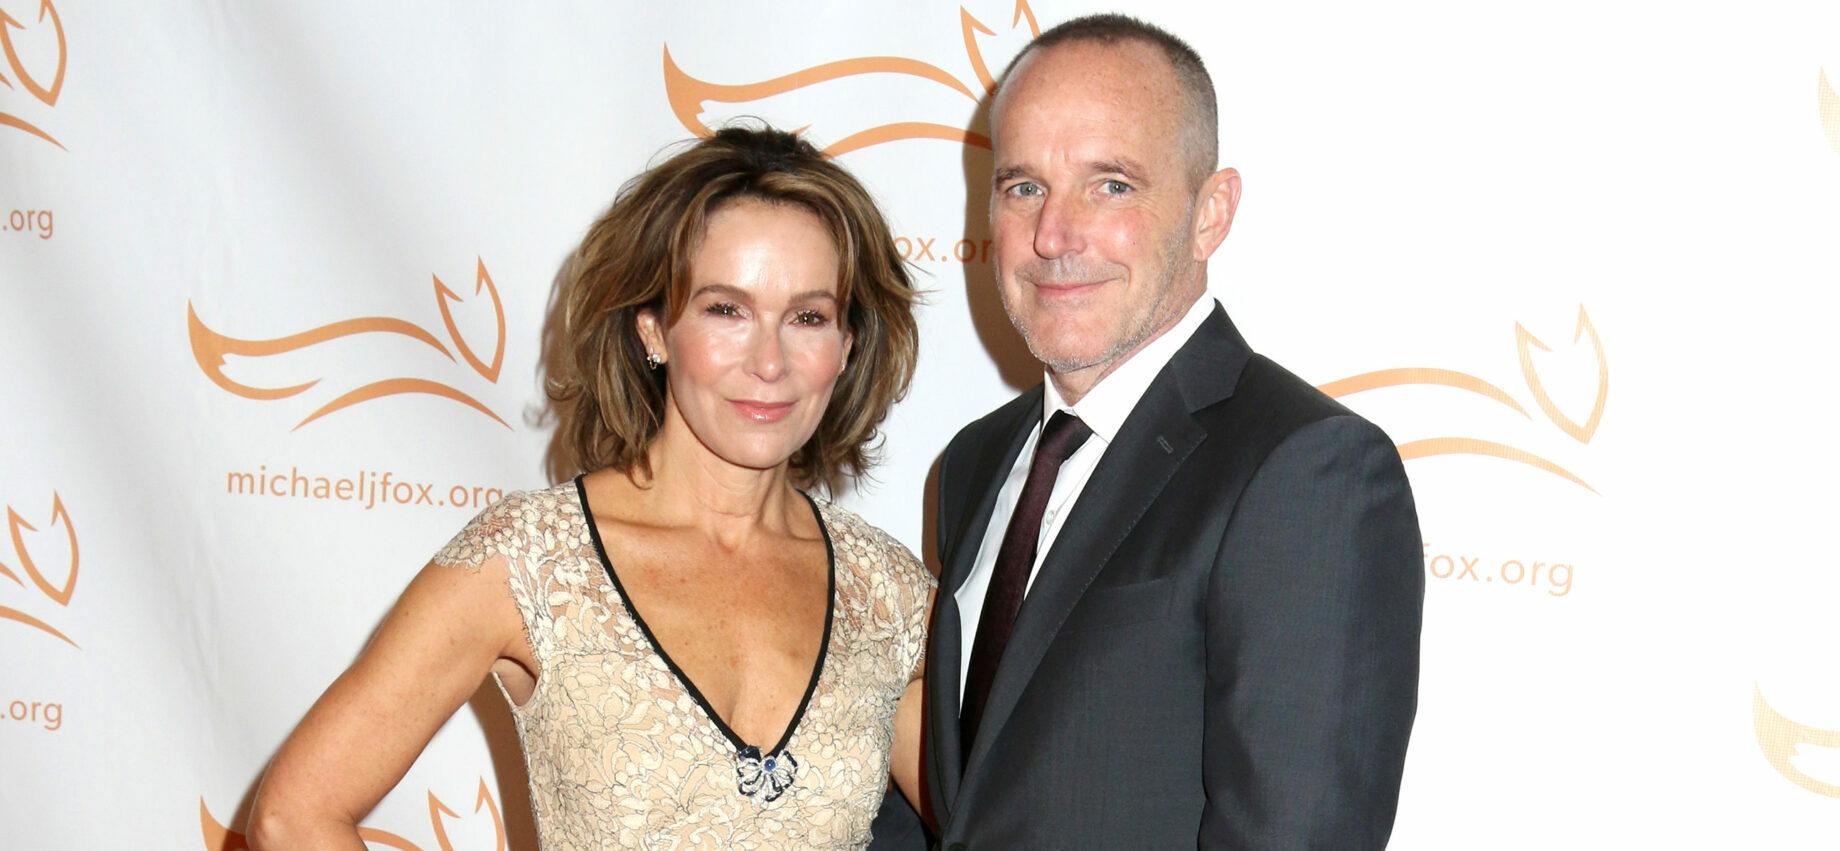 ‘Dirty Dancing’ Star Jennifer Grey Getting THOUSANDS In Spousal Support From Ex-Husband